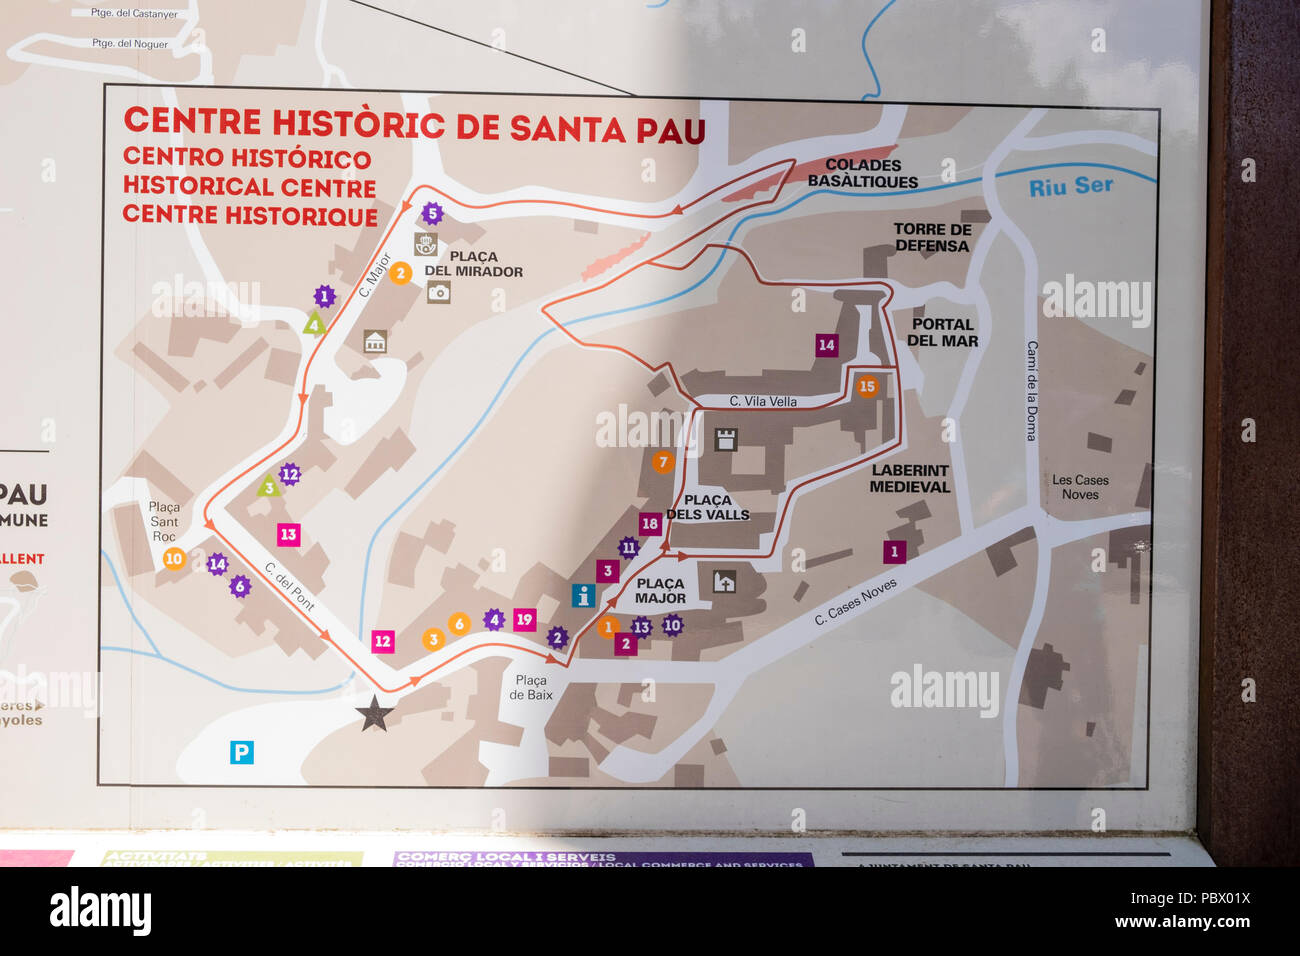 Information boards with plans and drawings of the old medieval center of the village of Santa Pau in the Garrotxa volcanic zone, Catalunya, Spain Stock Photo